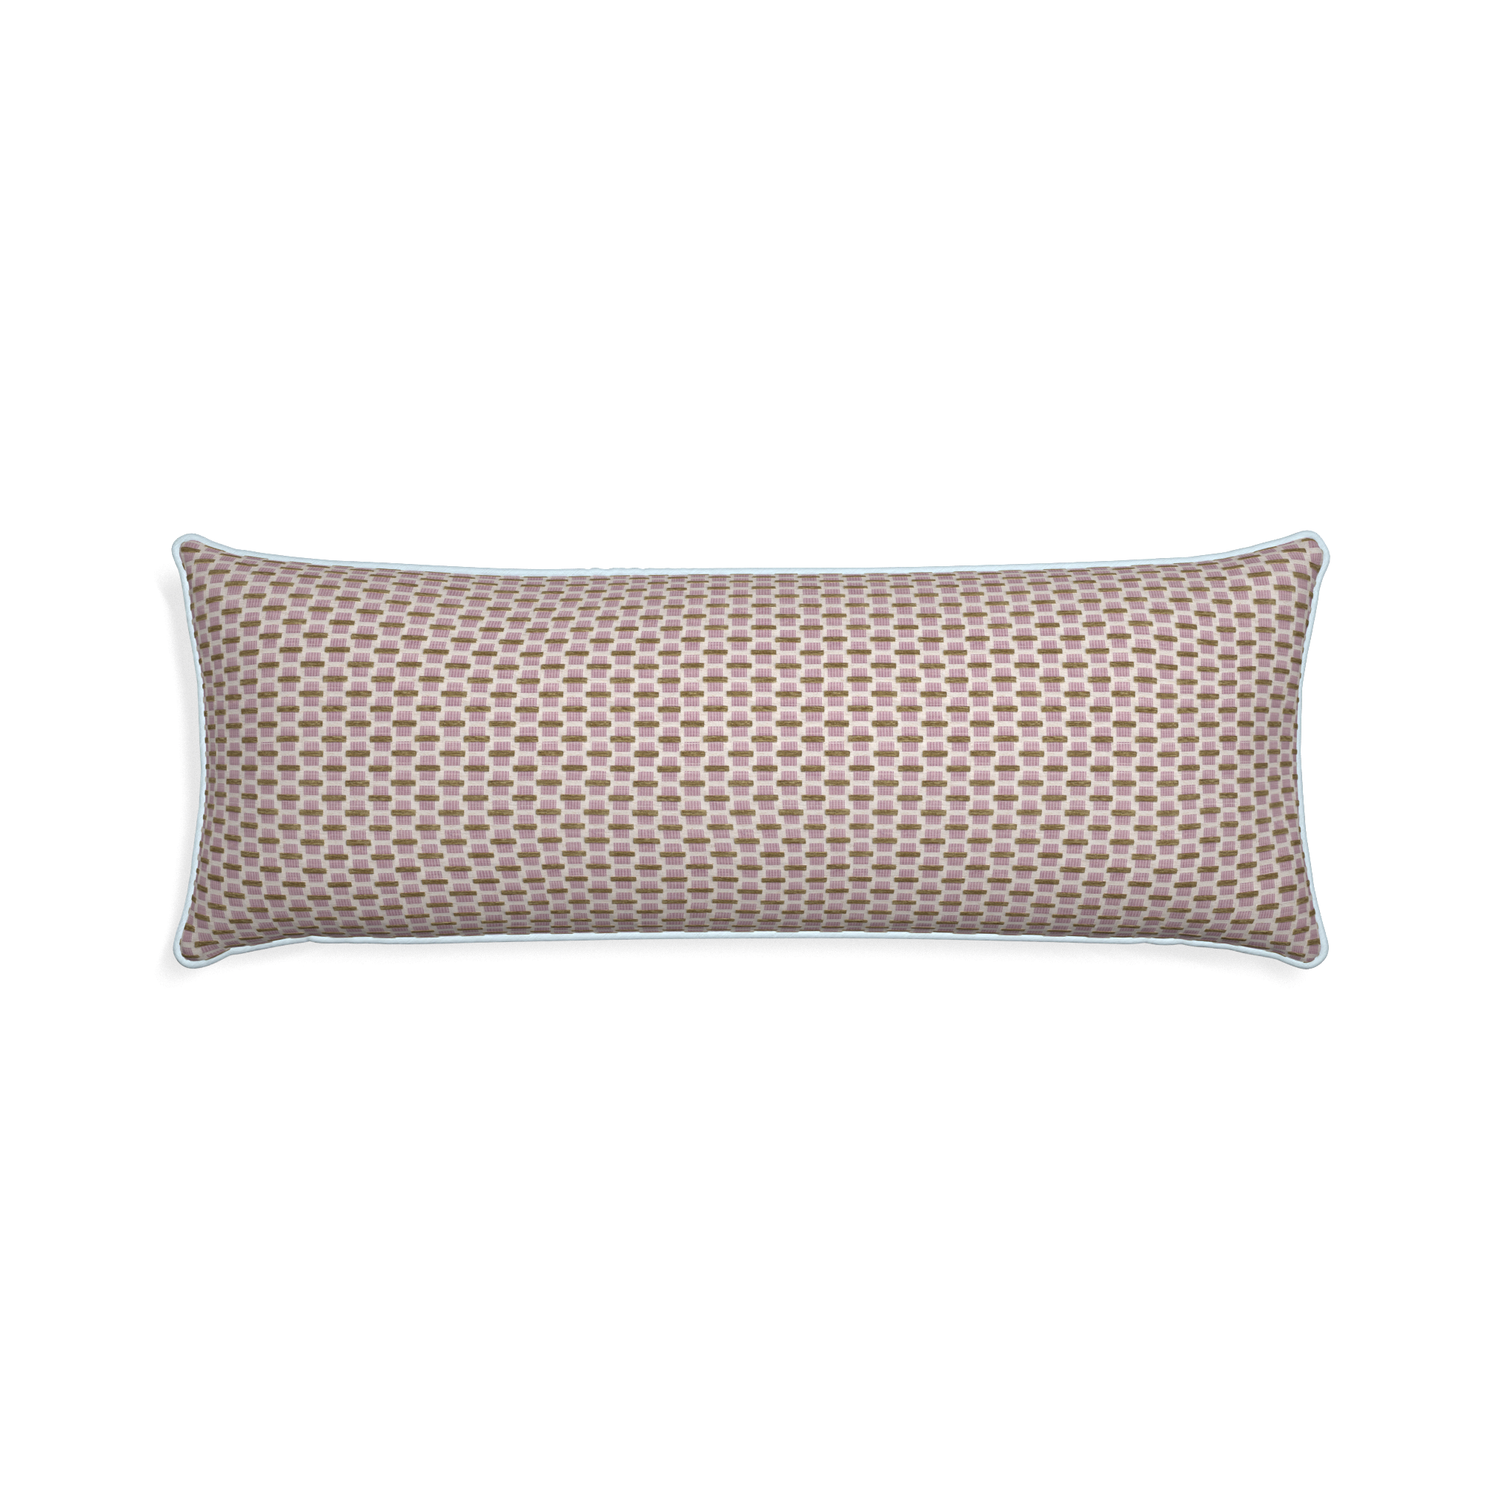 Xl-lumbar willow orchid custom pink geometric chenillepillow with powder piping on white background